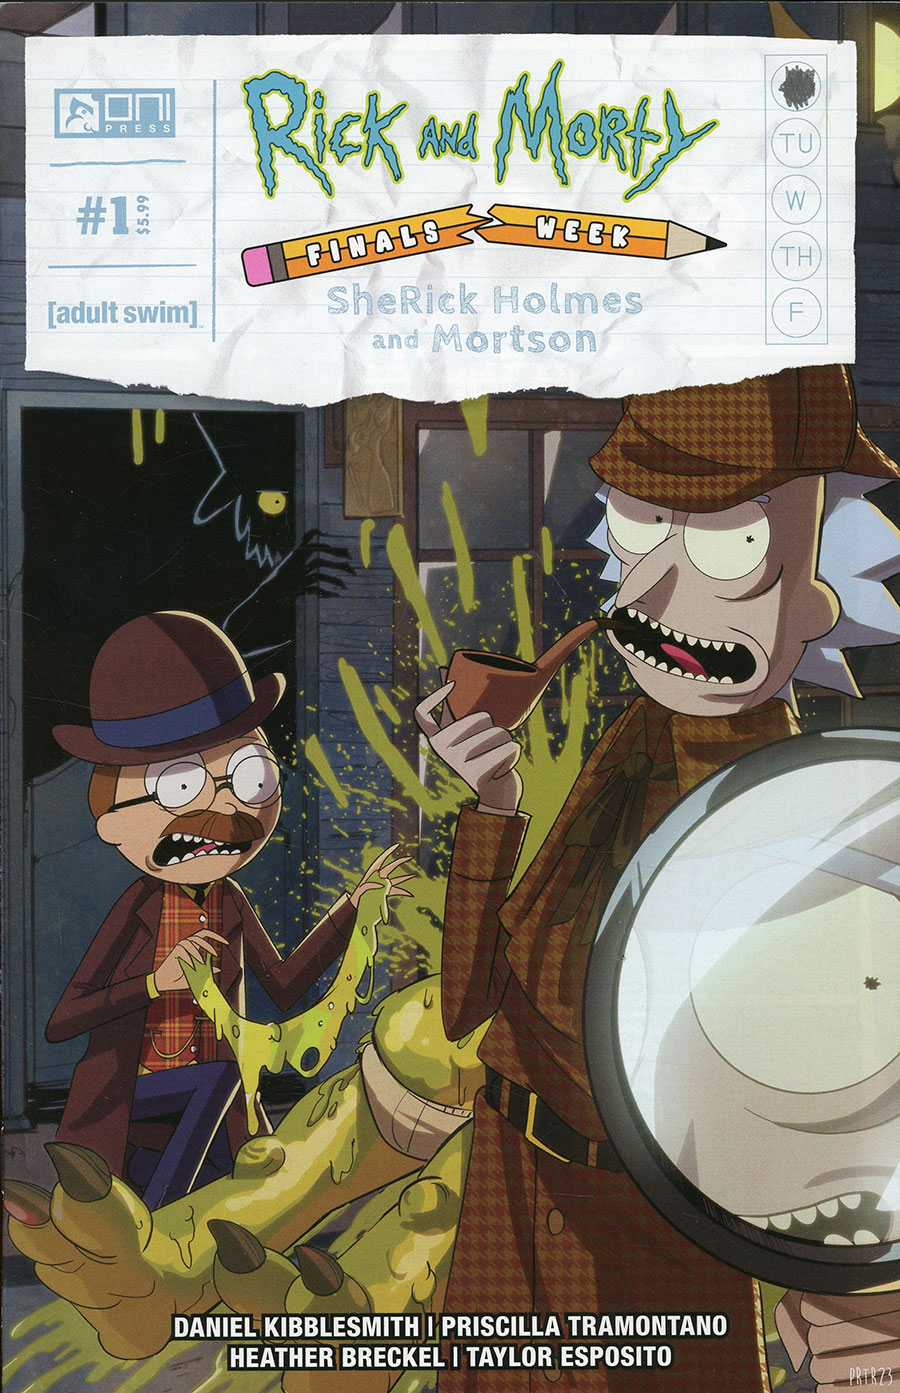 Rick And Morty Finals Week Sherick Holmes And Mortson #1 Cover A Regular Priscilla Tramontano Cover